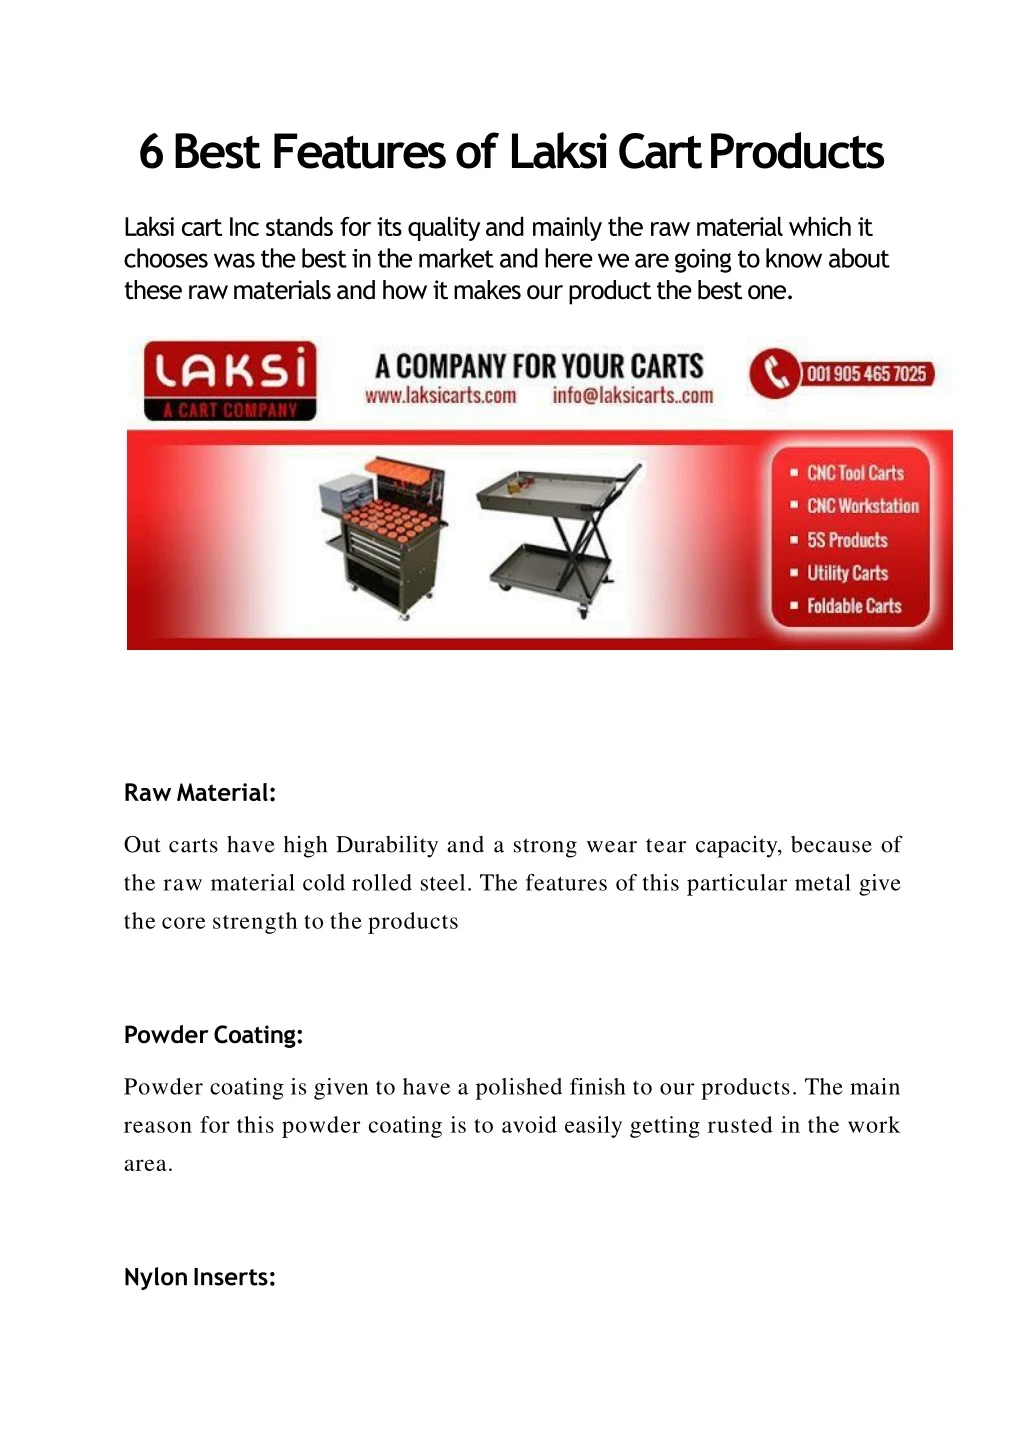 6 best features of laksi cart products